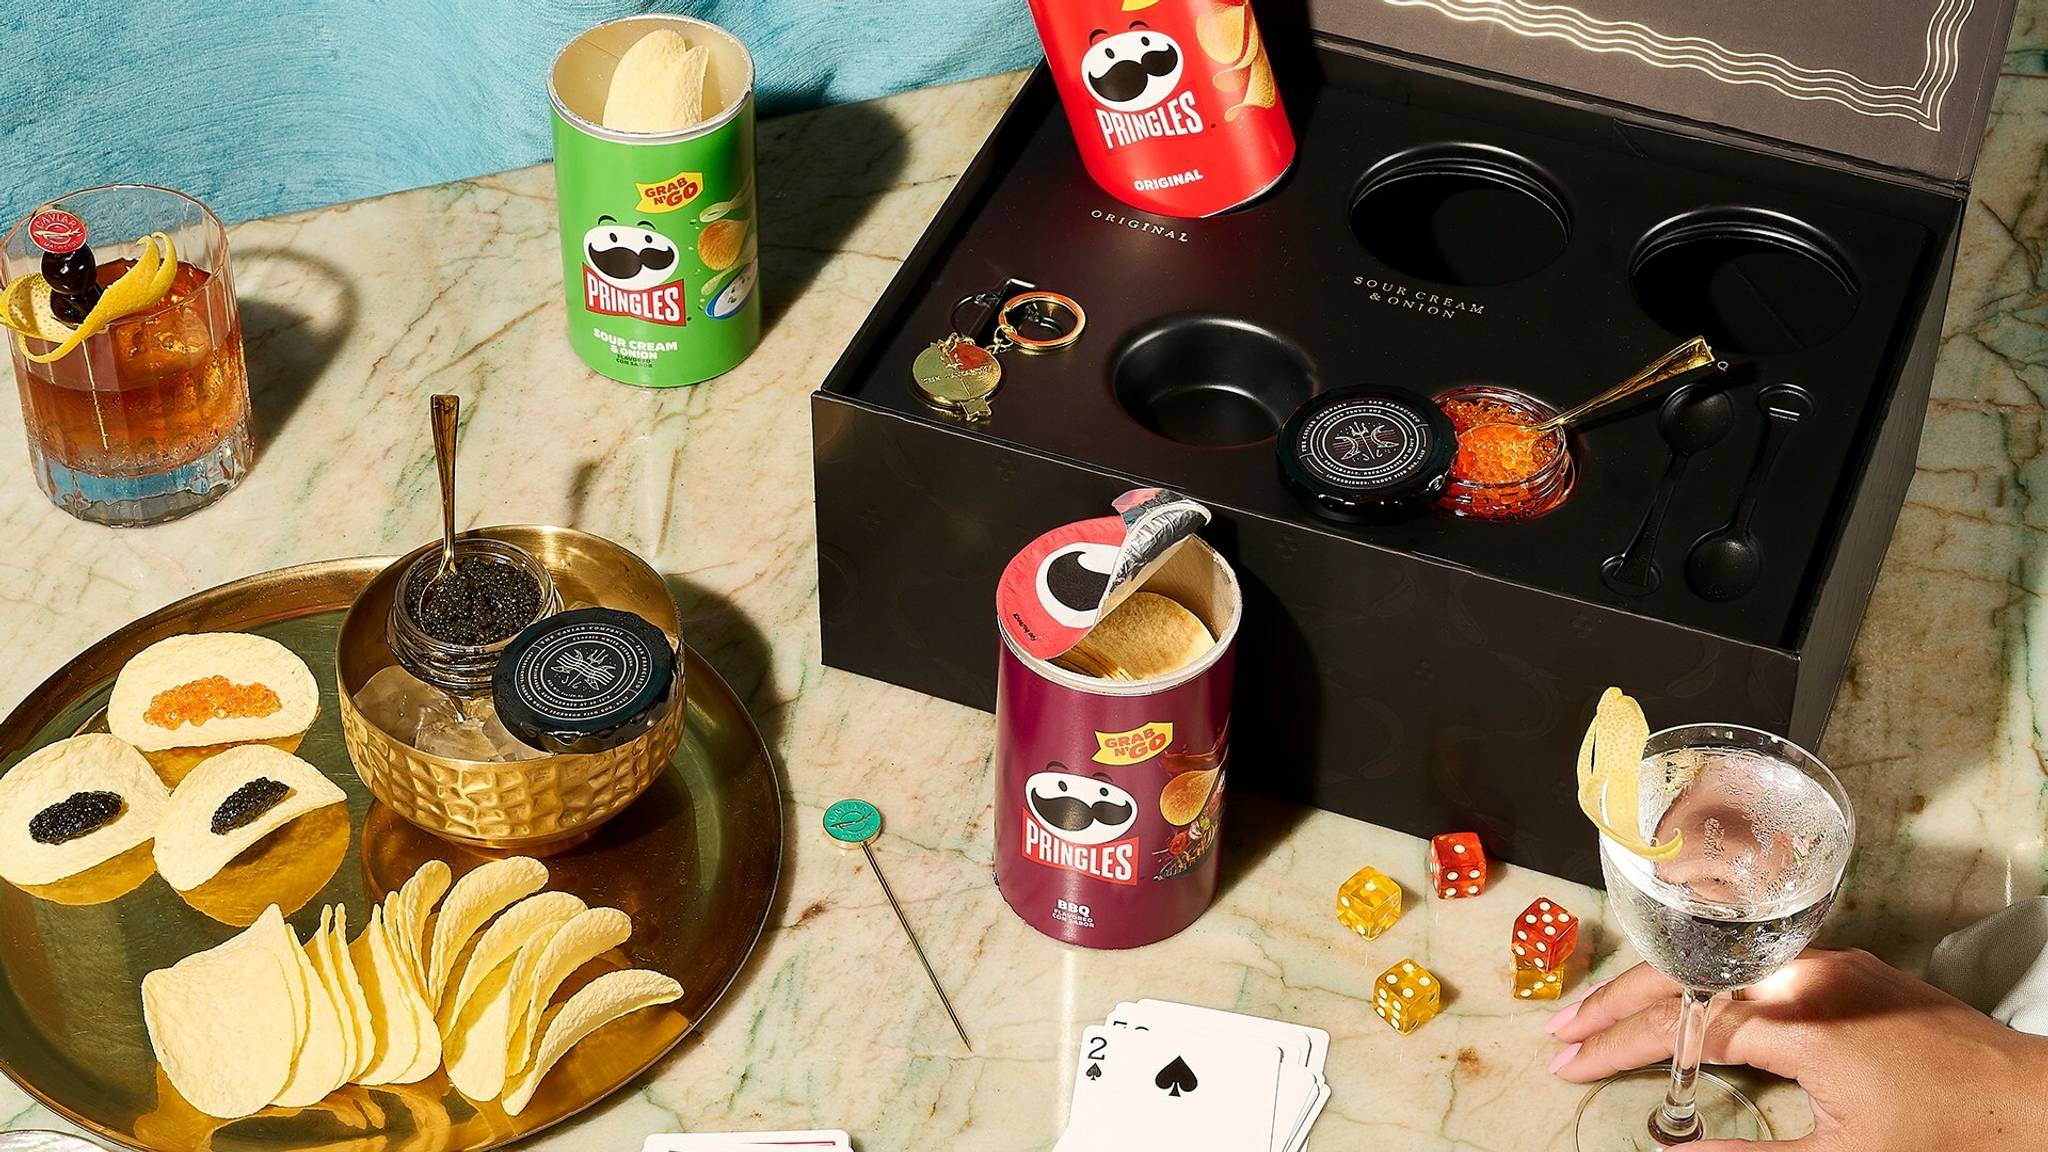 Pringles’ caviar collection brings luxury snacking home